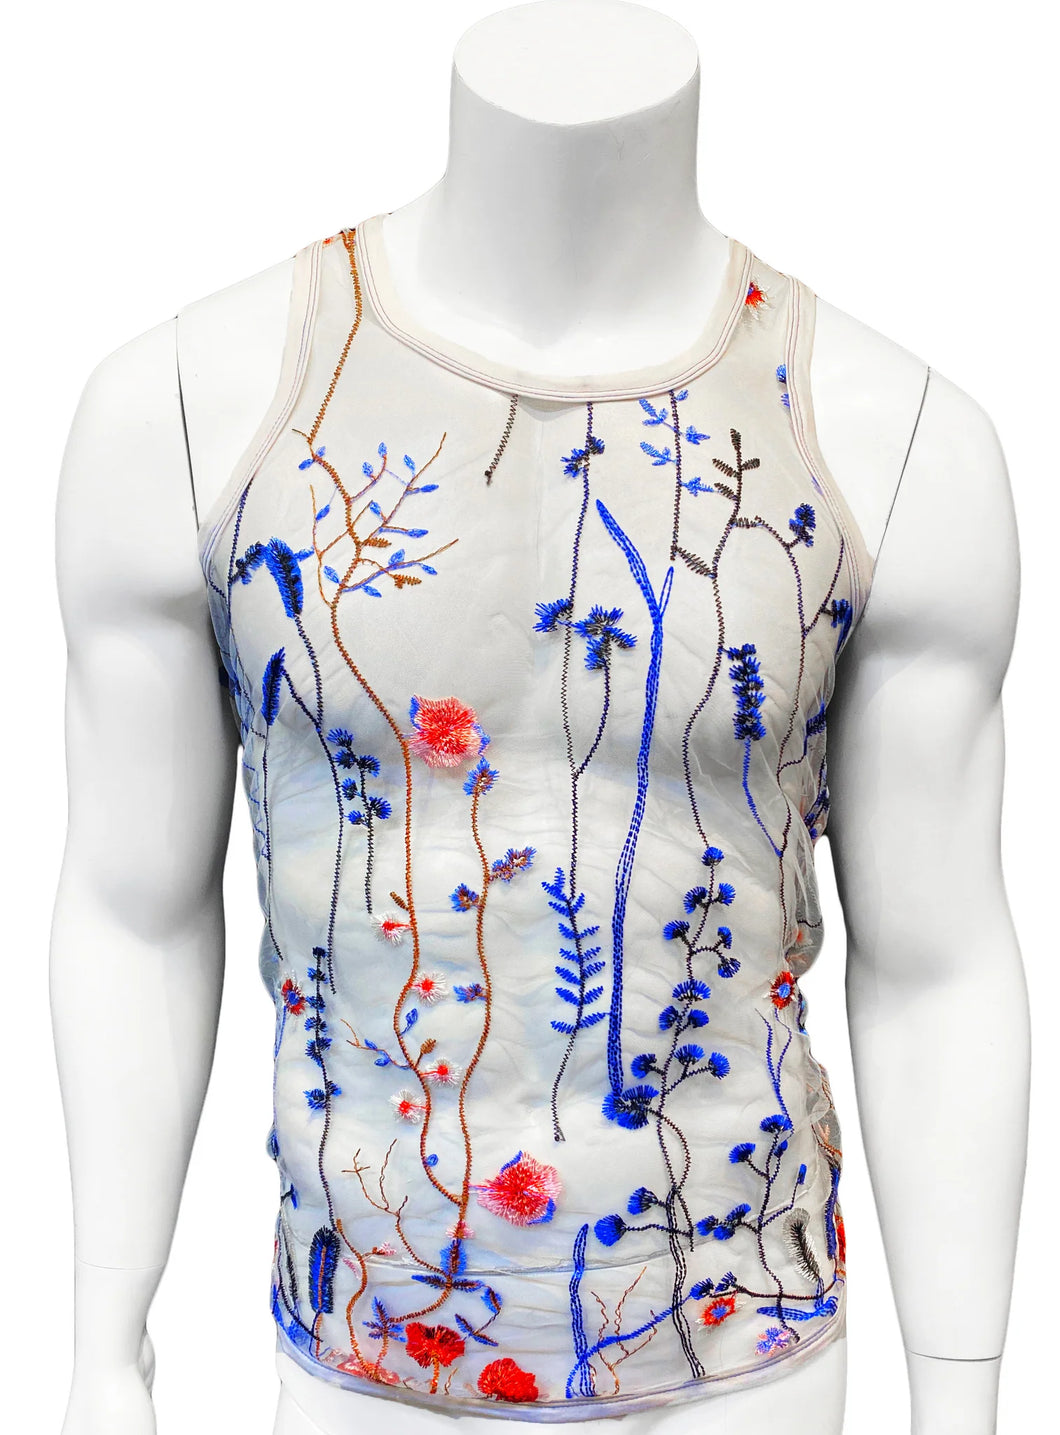 Embroidered Floral Mesh Tank - White and Blue